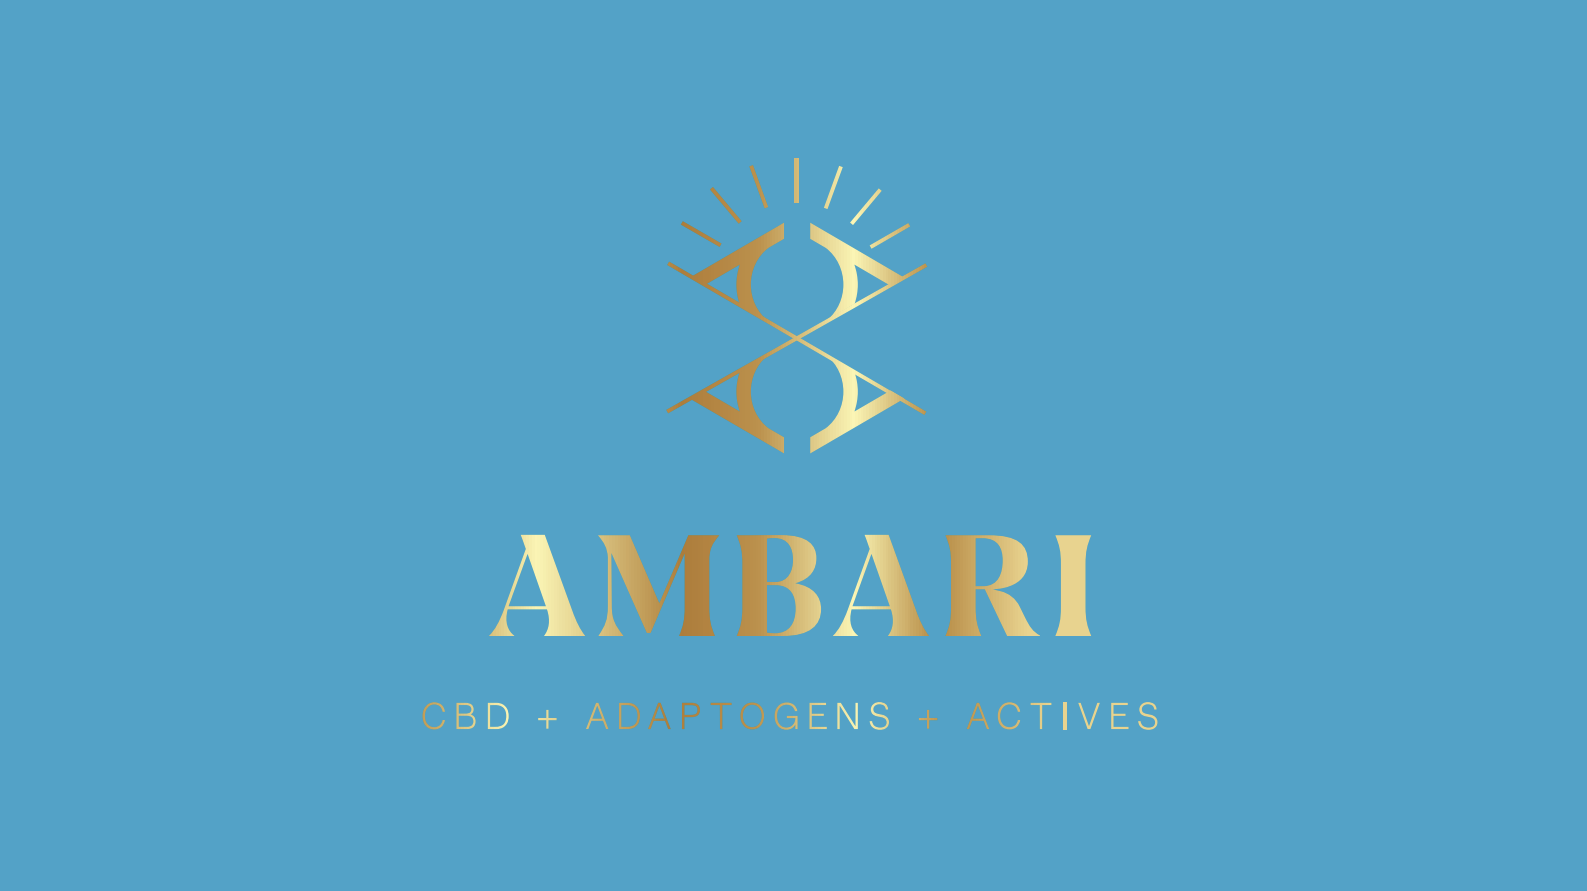 An image showing the design Venga created for Ambari's first slide in their pitch deck.